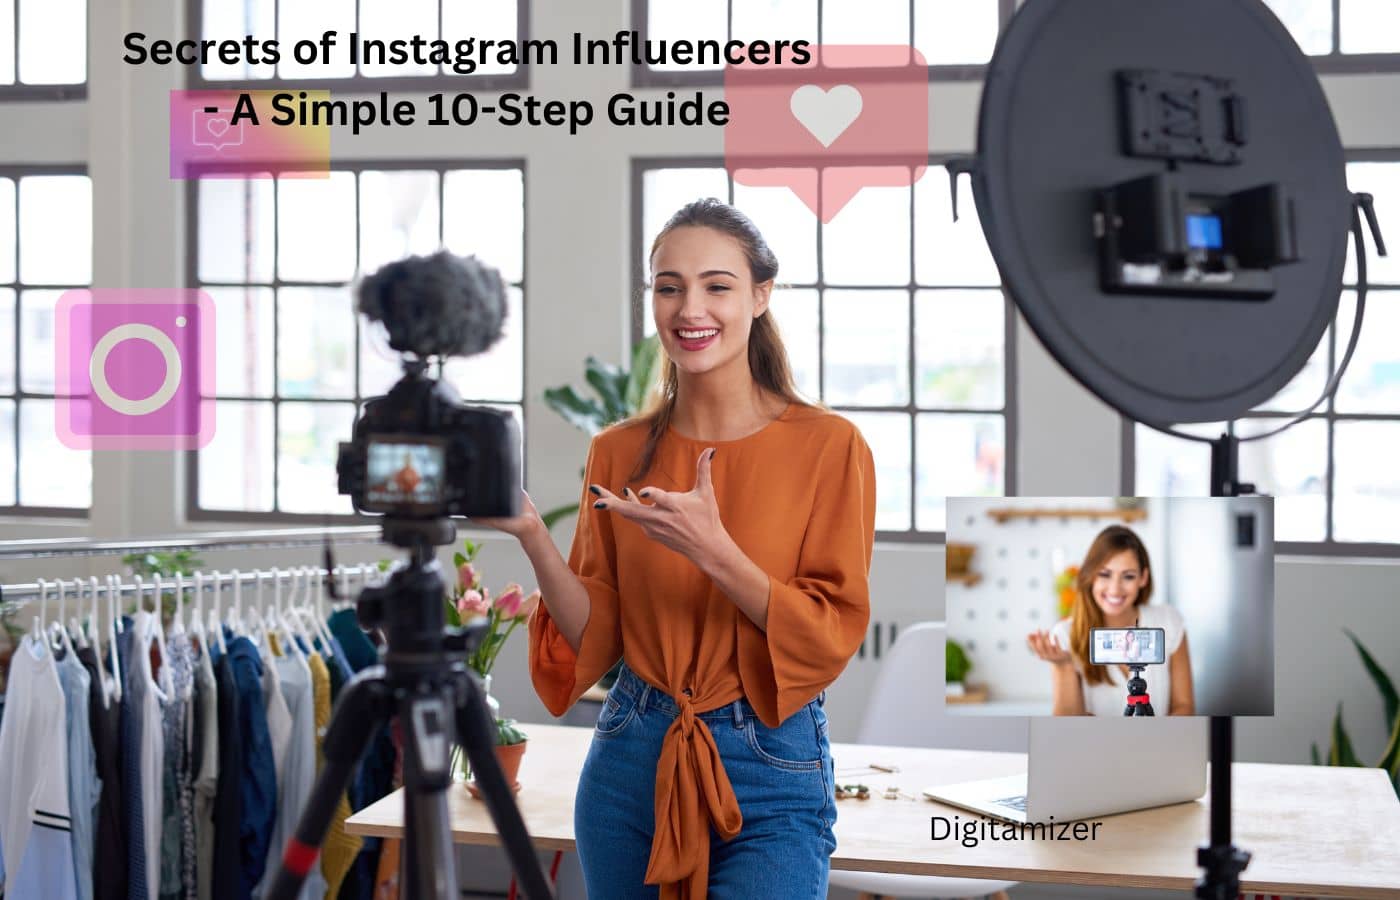 Secrets of Instagram Influencers - A Simple 10-Step Guide